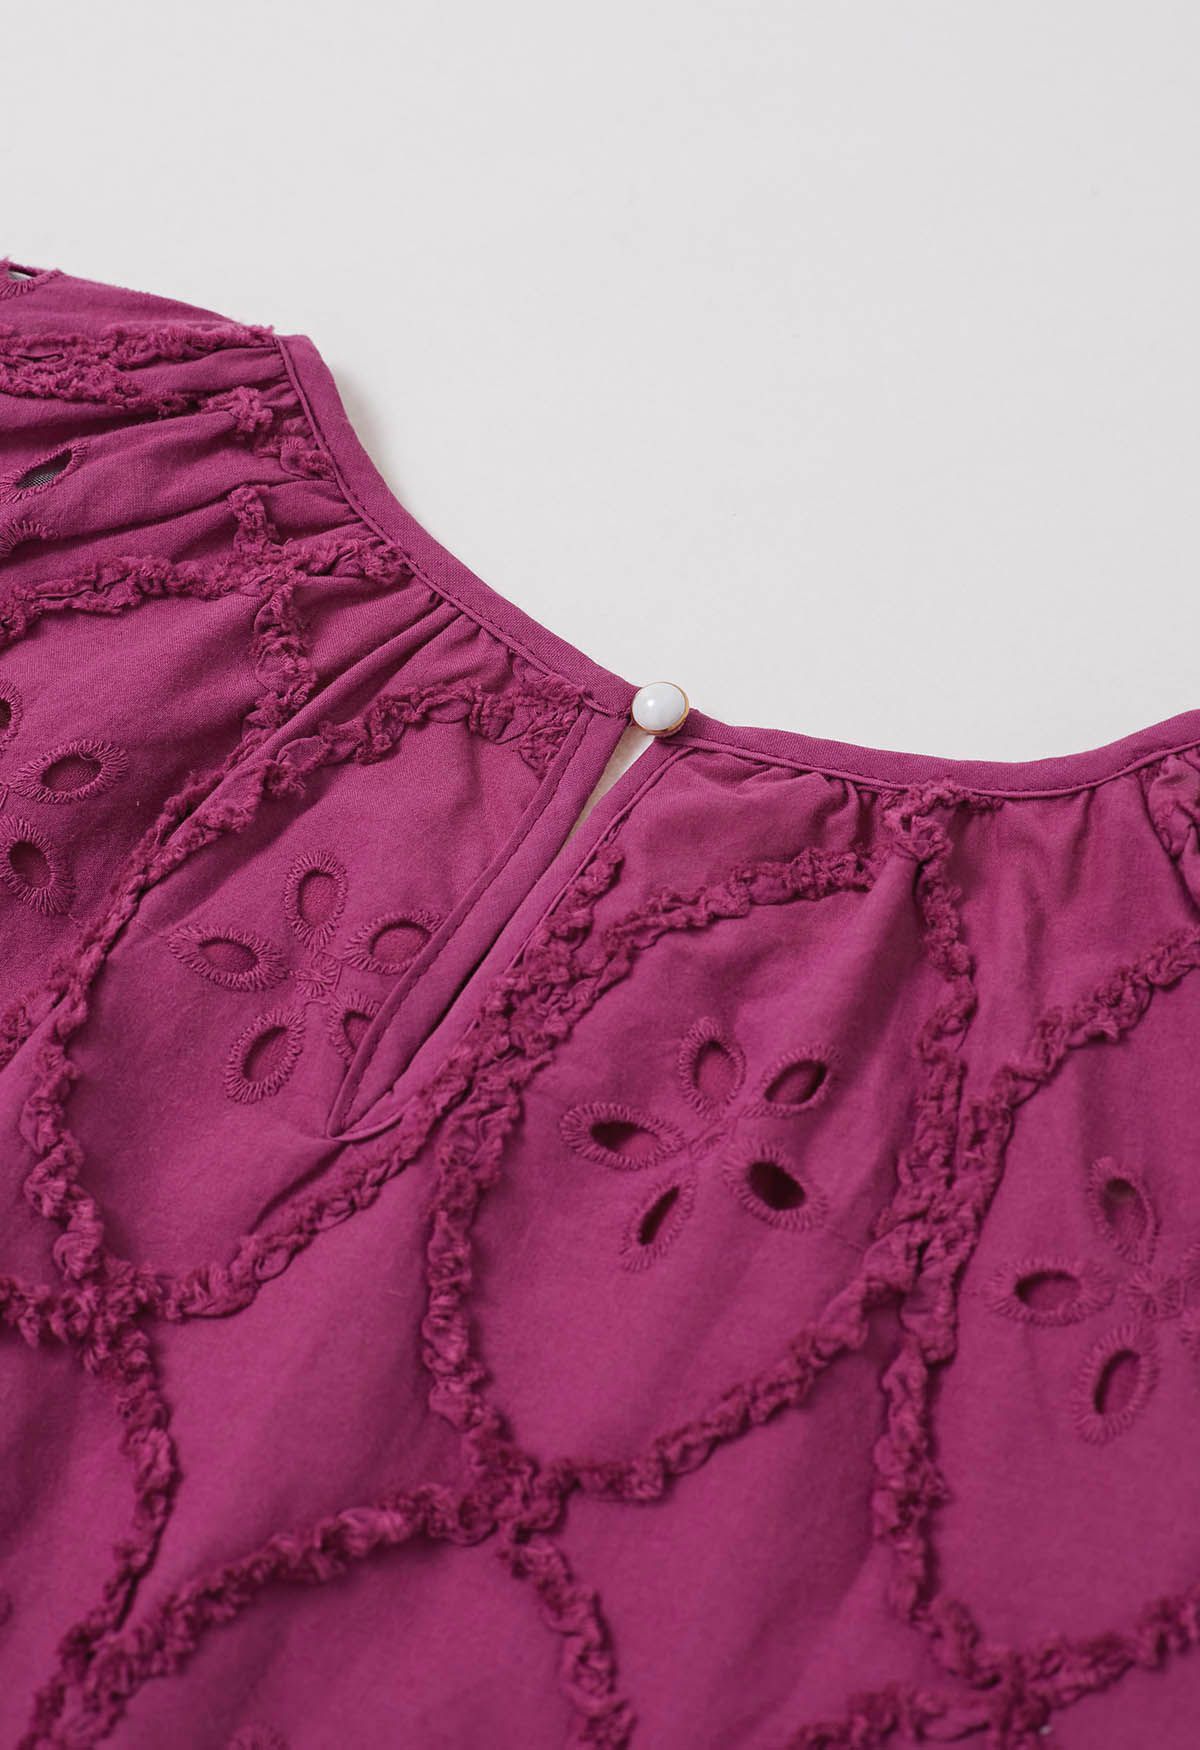 Floral Eyelet Embroidery Bubble Sleeves Top in Magenta